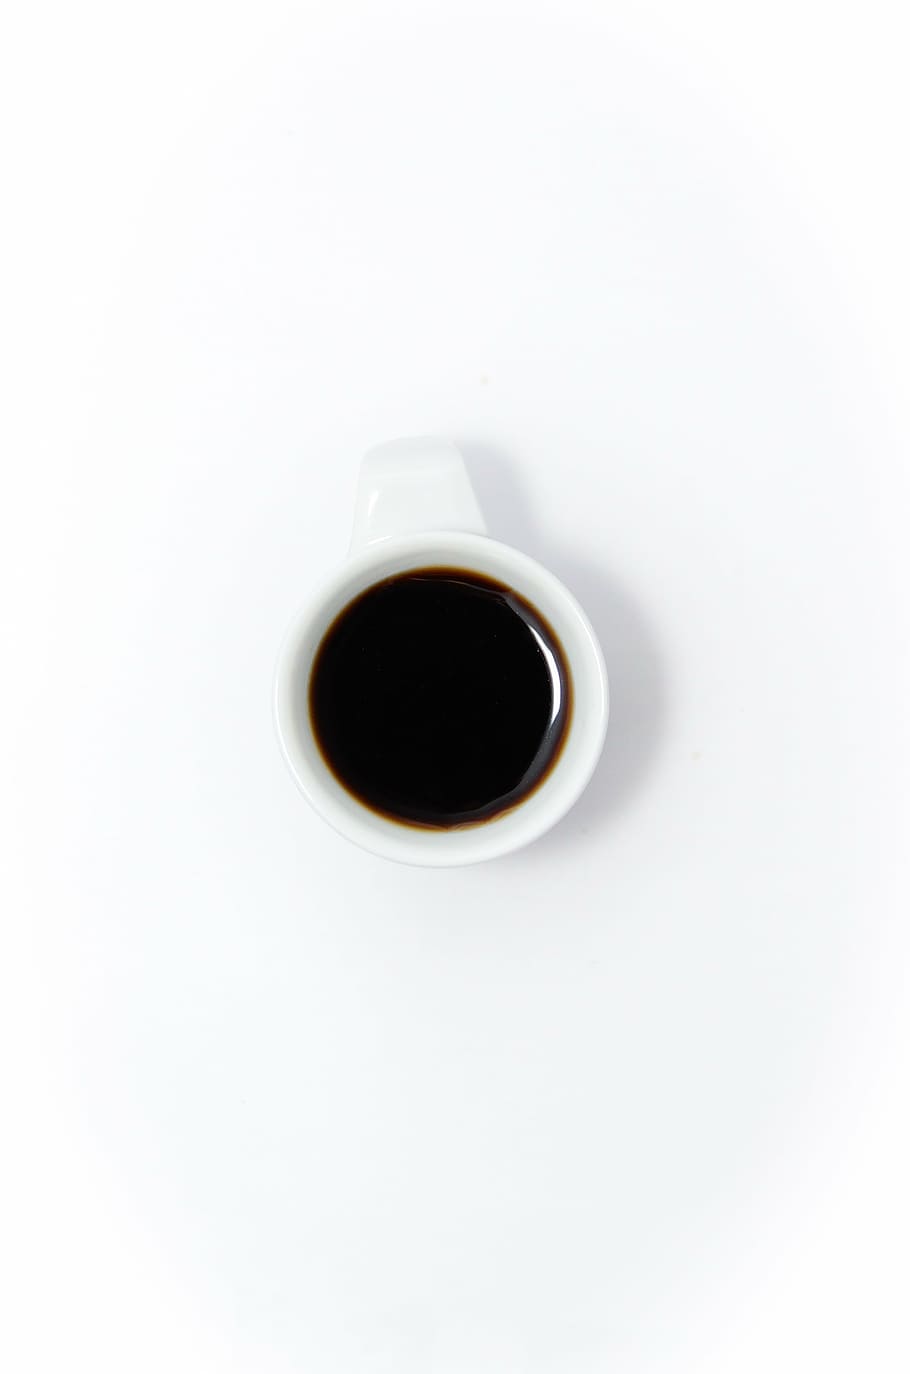 cup of coffee, a cup of coffee, coffee, the drink, caffeine, the brew, coffee maker, aroma, brown, cup